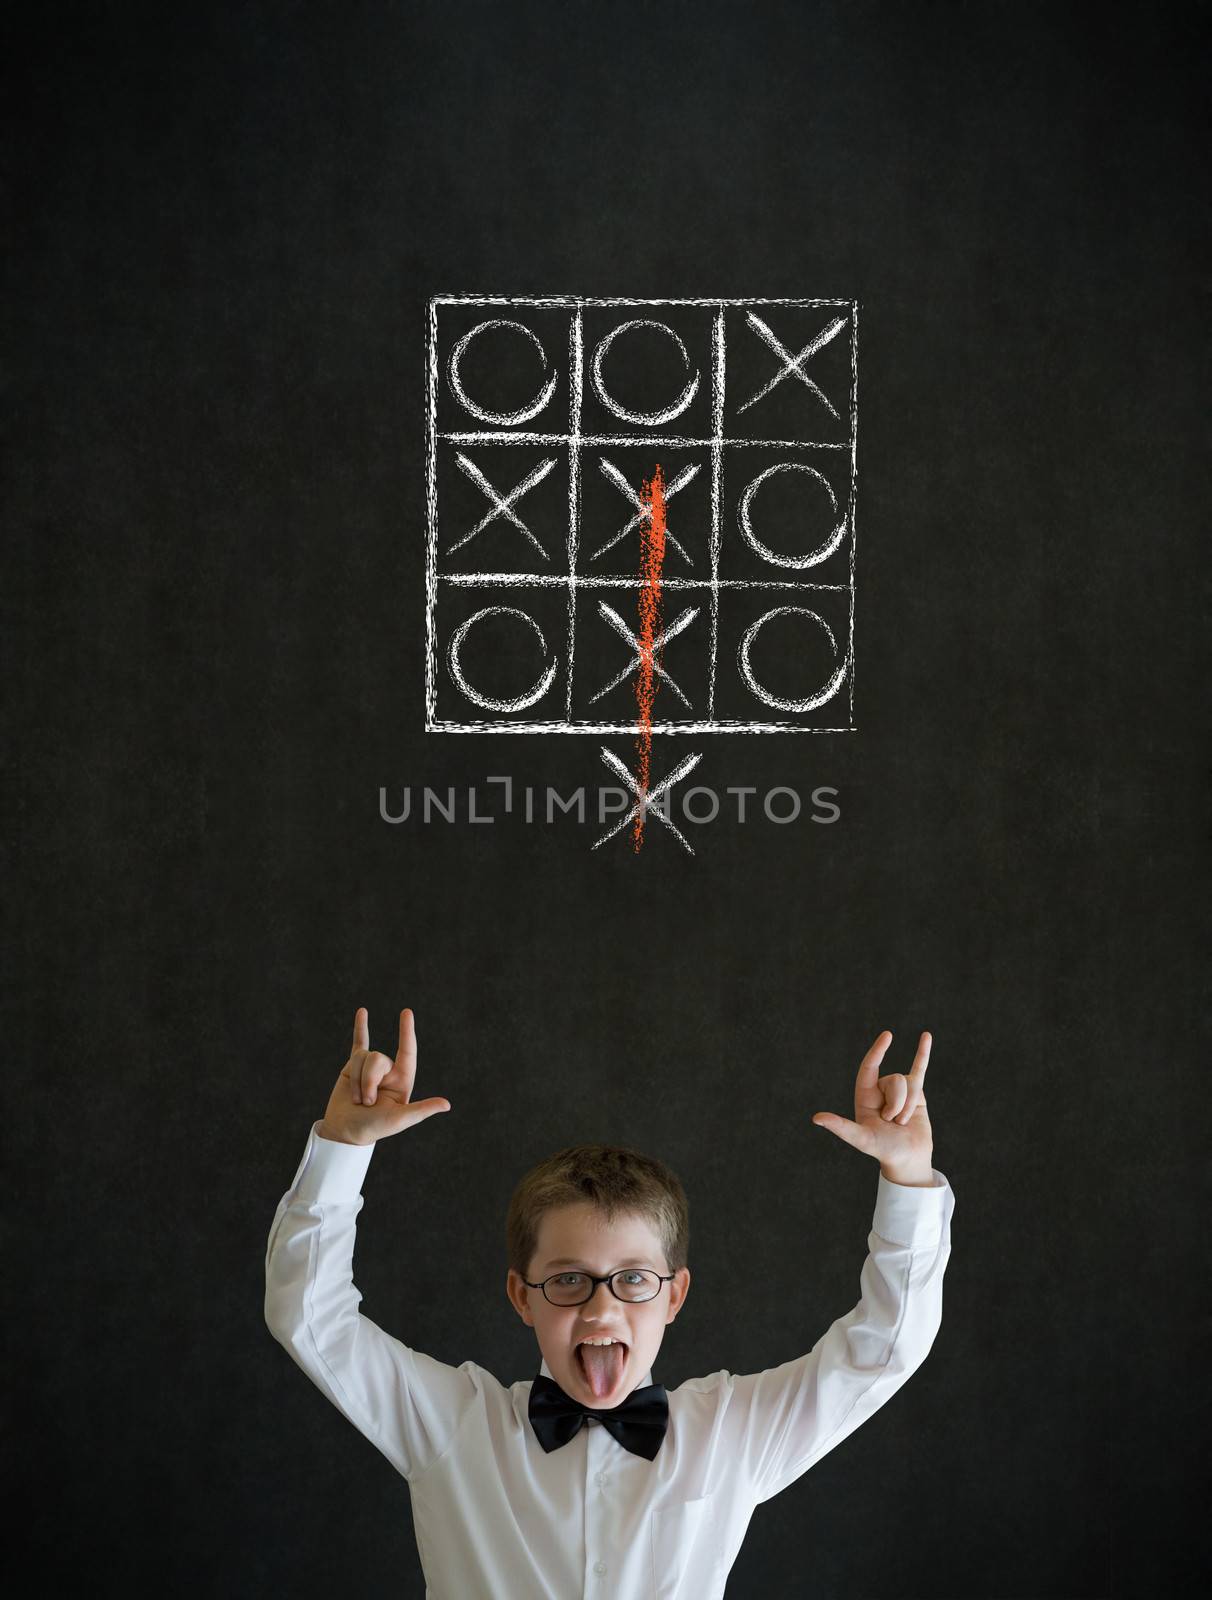 Knowledge rocks boy business man with thinking out of the box tic tac toe concept by alistaircotton